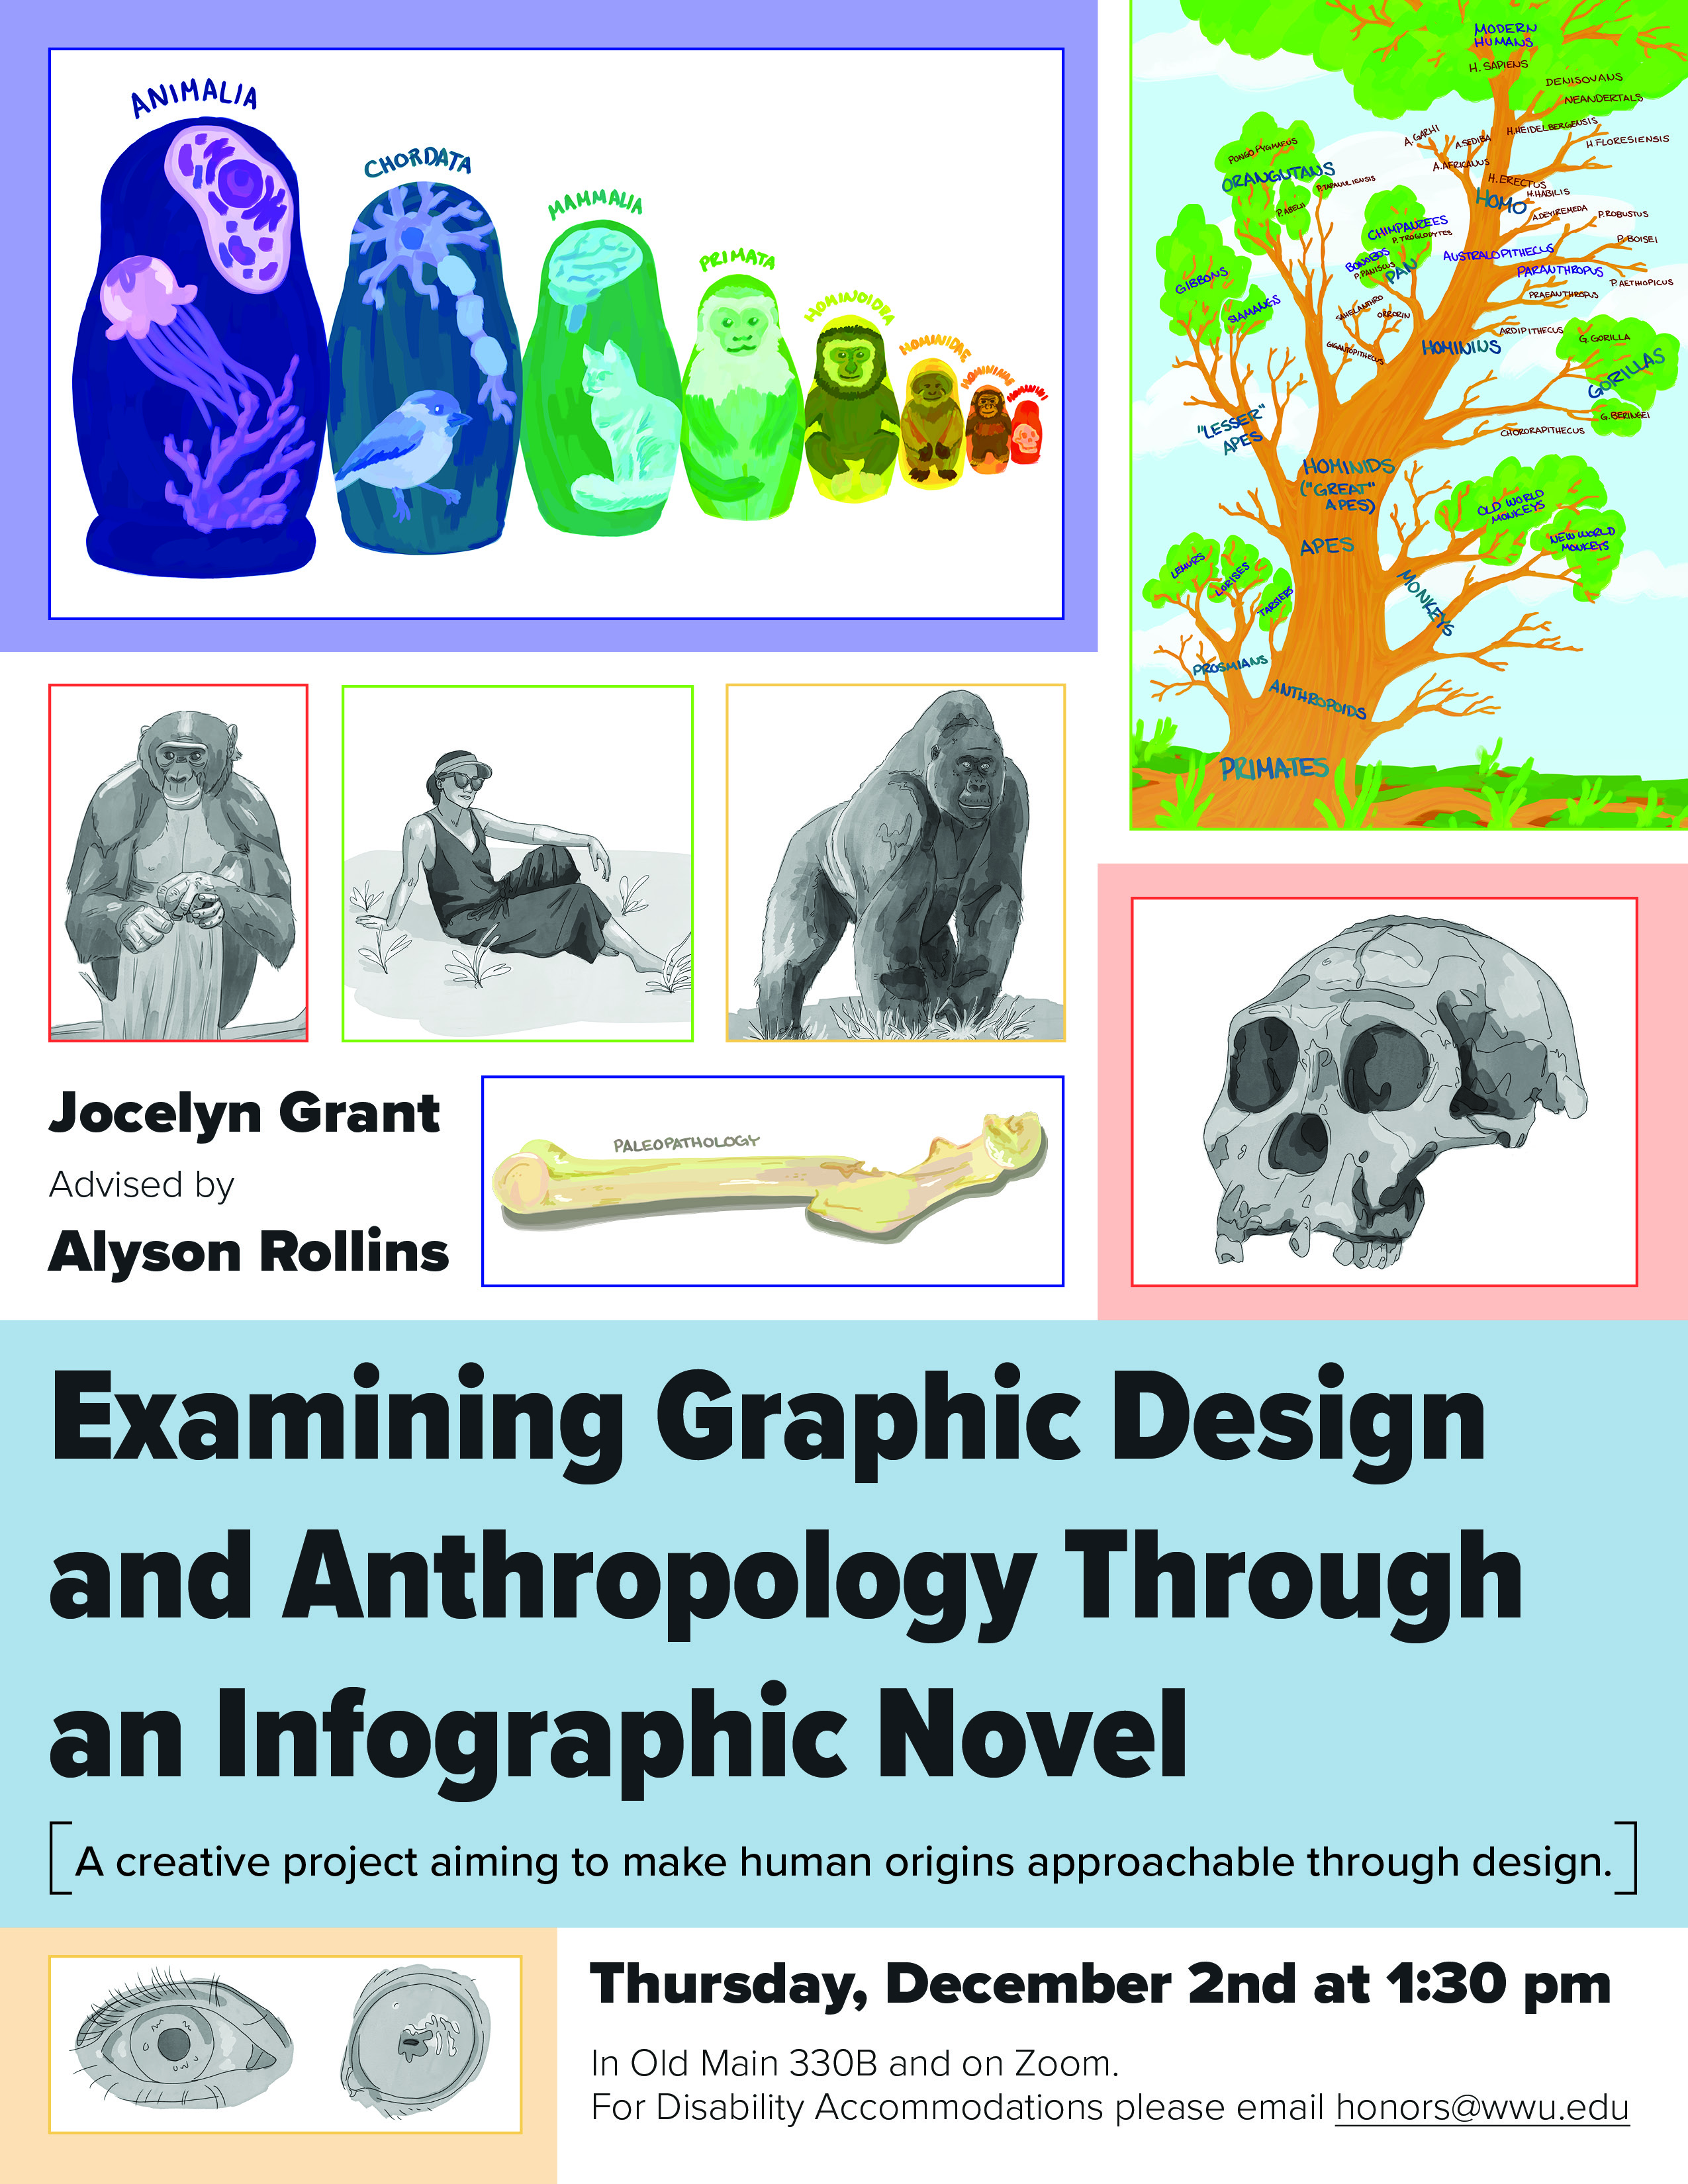 A multicolor poster with illustrations of primates and illustrative diagrams in color and black and white. The text reads: “Examining Graphic Design and Anthropology Through an Infographic Novel. A creative project aiming to make human origins approachable through design. By Jocelyn Grant, Advised by Alyson Rollins, Thursday, December 2nd at 1:30 pm in OM330B or on Zoom, For Disability Accommodations please email honors@wwu.edu” 